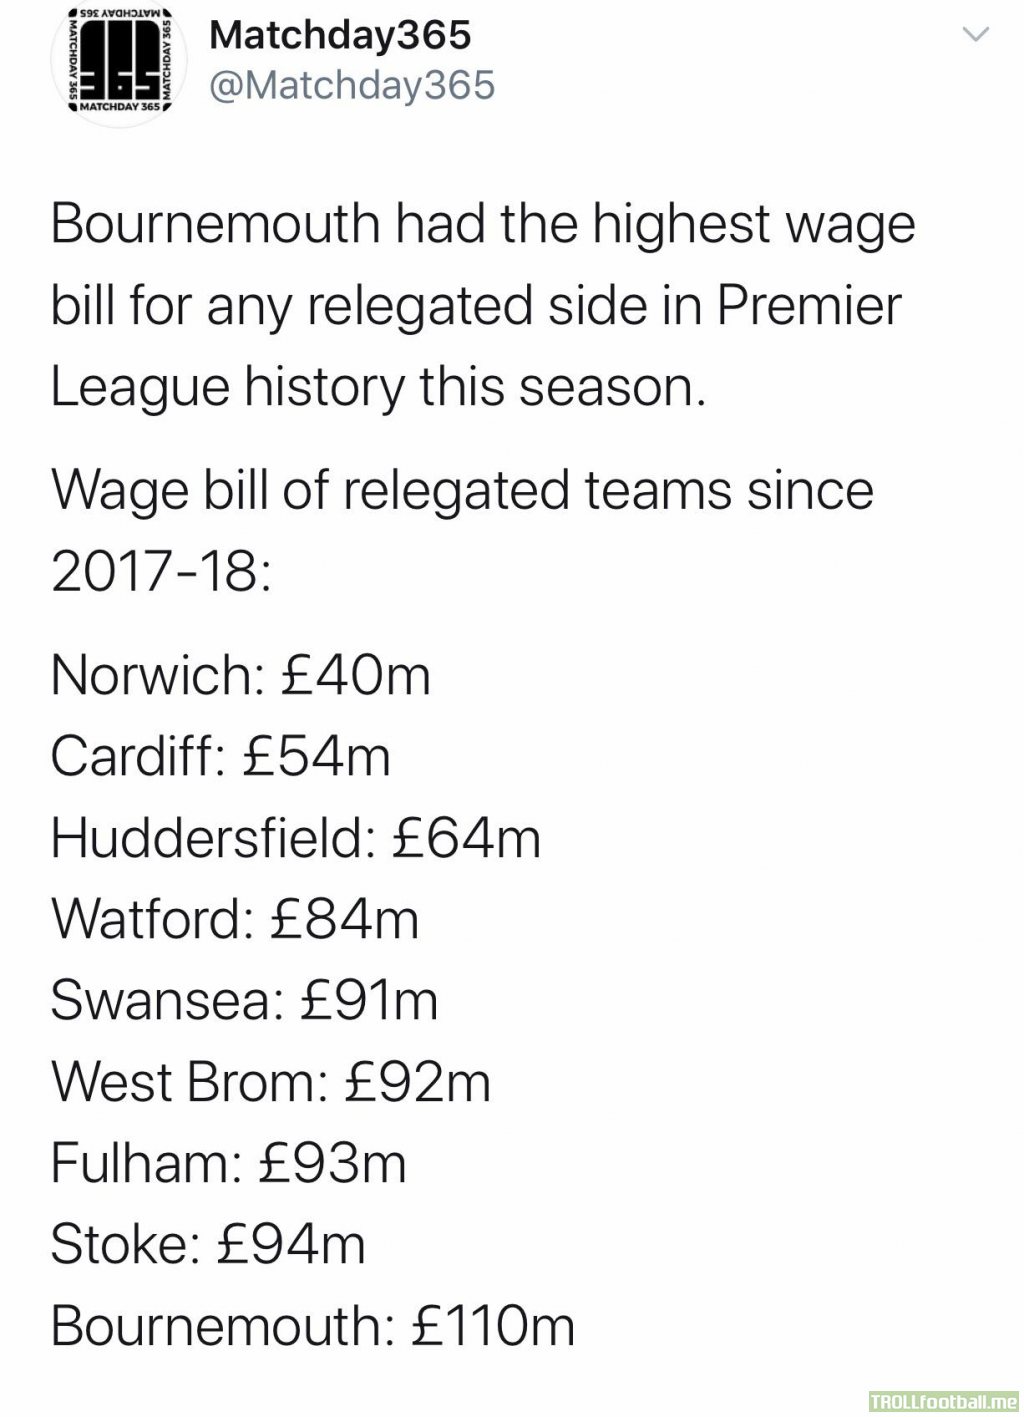 Bournemouth had the highest wage bill of any relegated side in Premier League history for a total of ~£110 million.